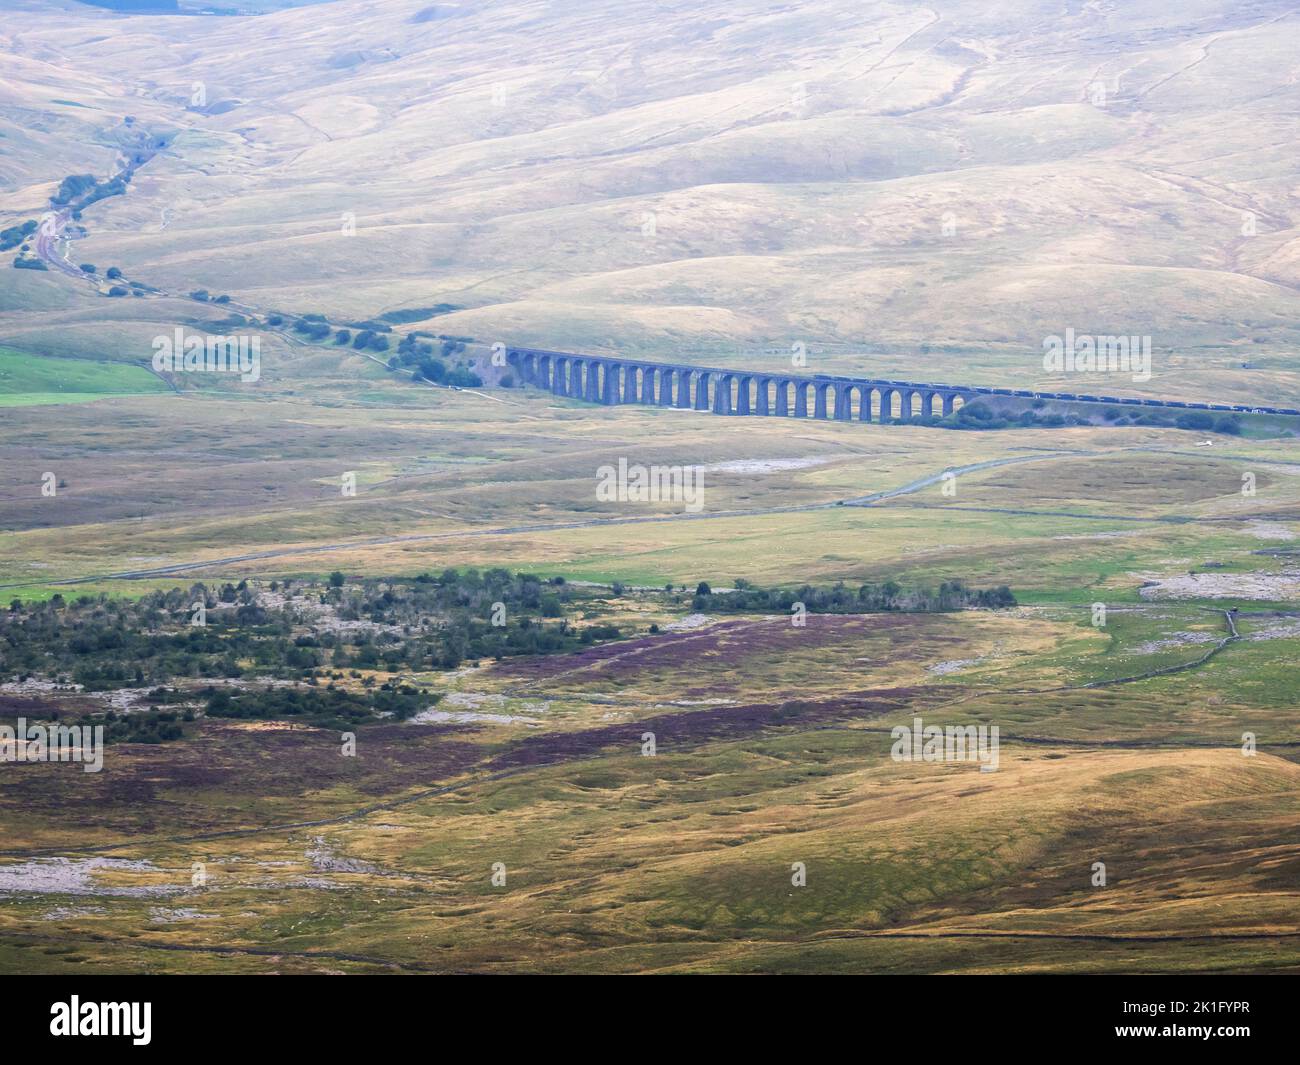 Looking down on the Ribblehead viaduct on the Settle, Carlisle line with a train crossing, from Ingleborough, Yorkshire Dales, UK. Stock Photo